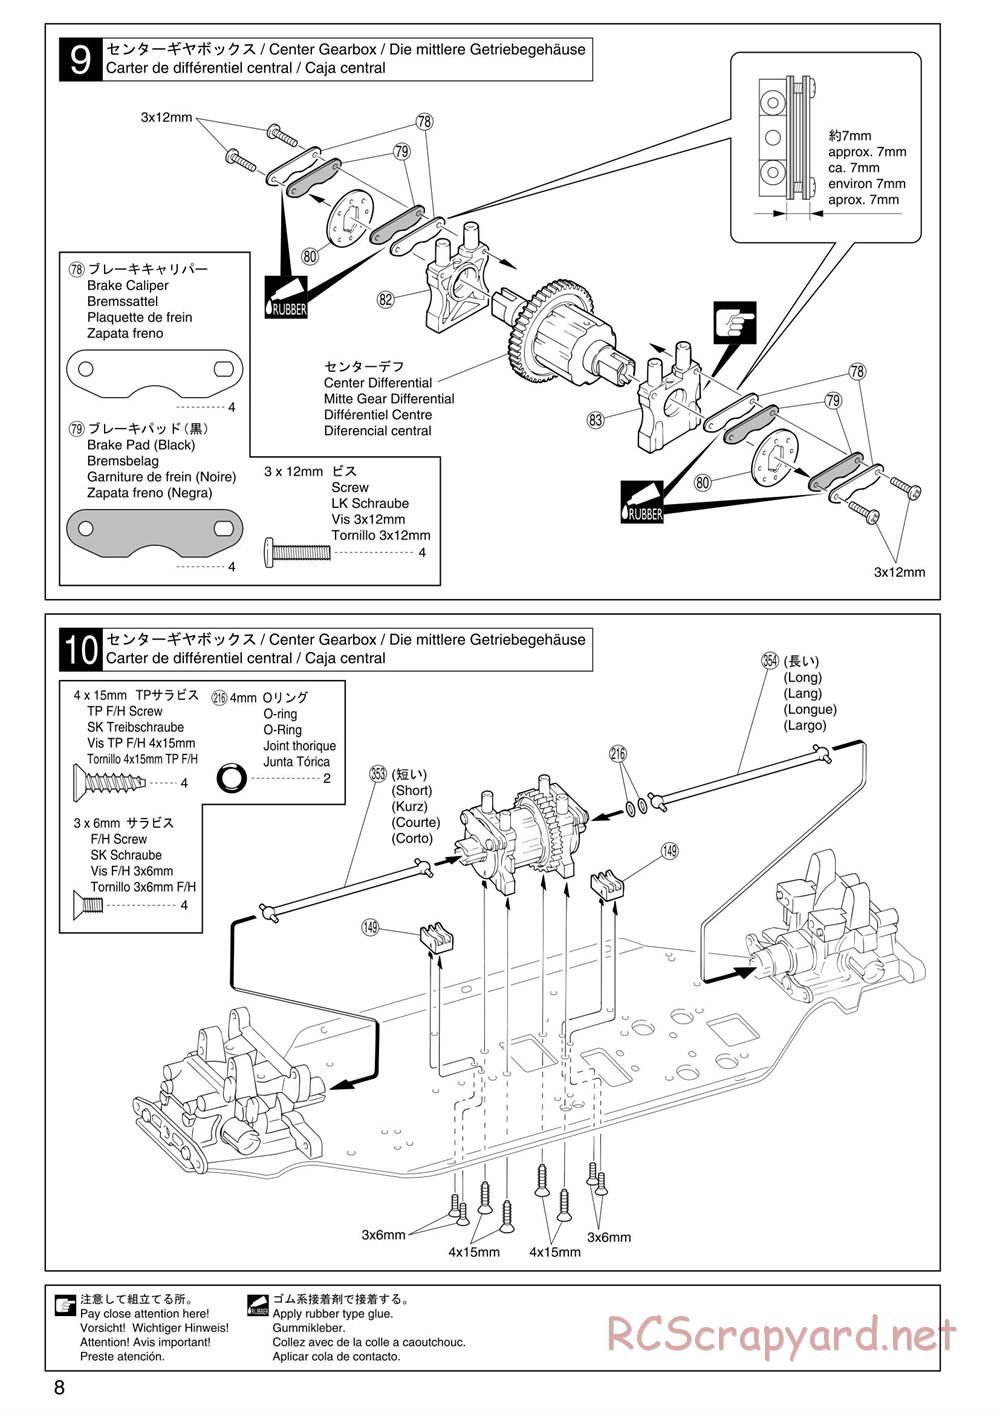 Kyosho - Inferno ST (2005) - Manual - Page 8